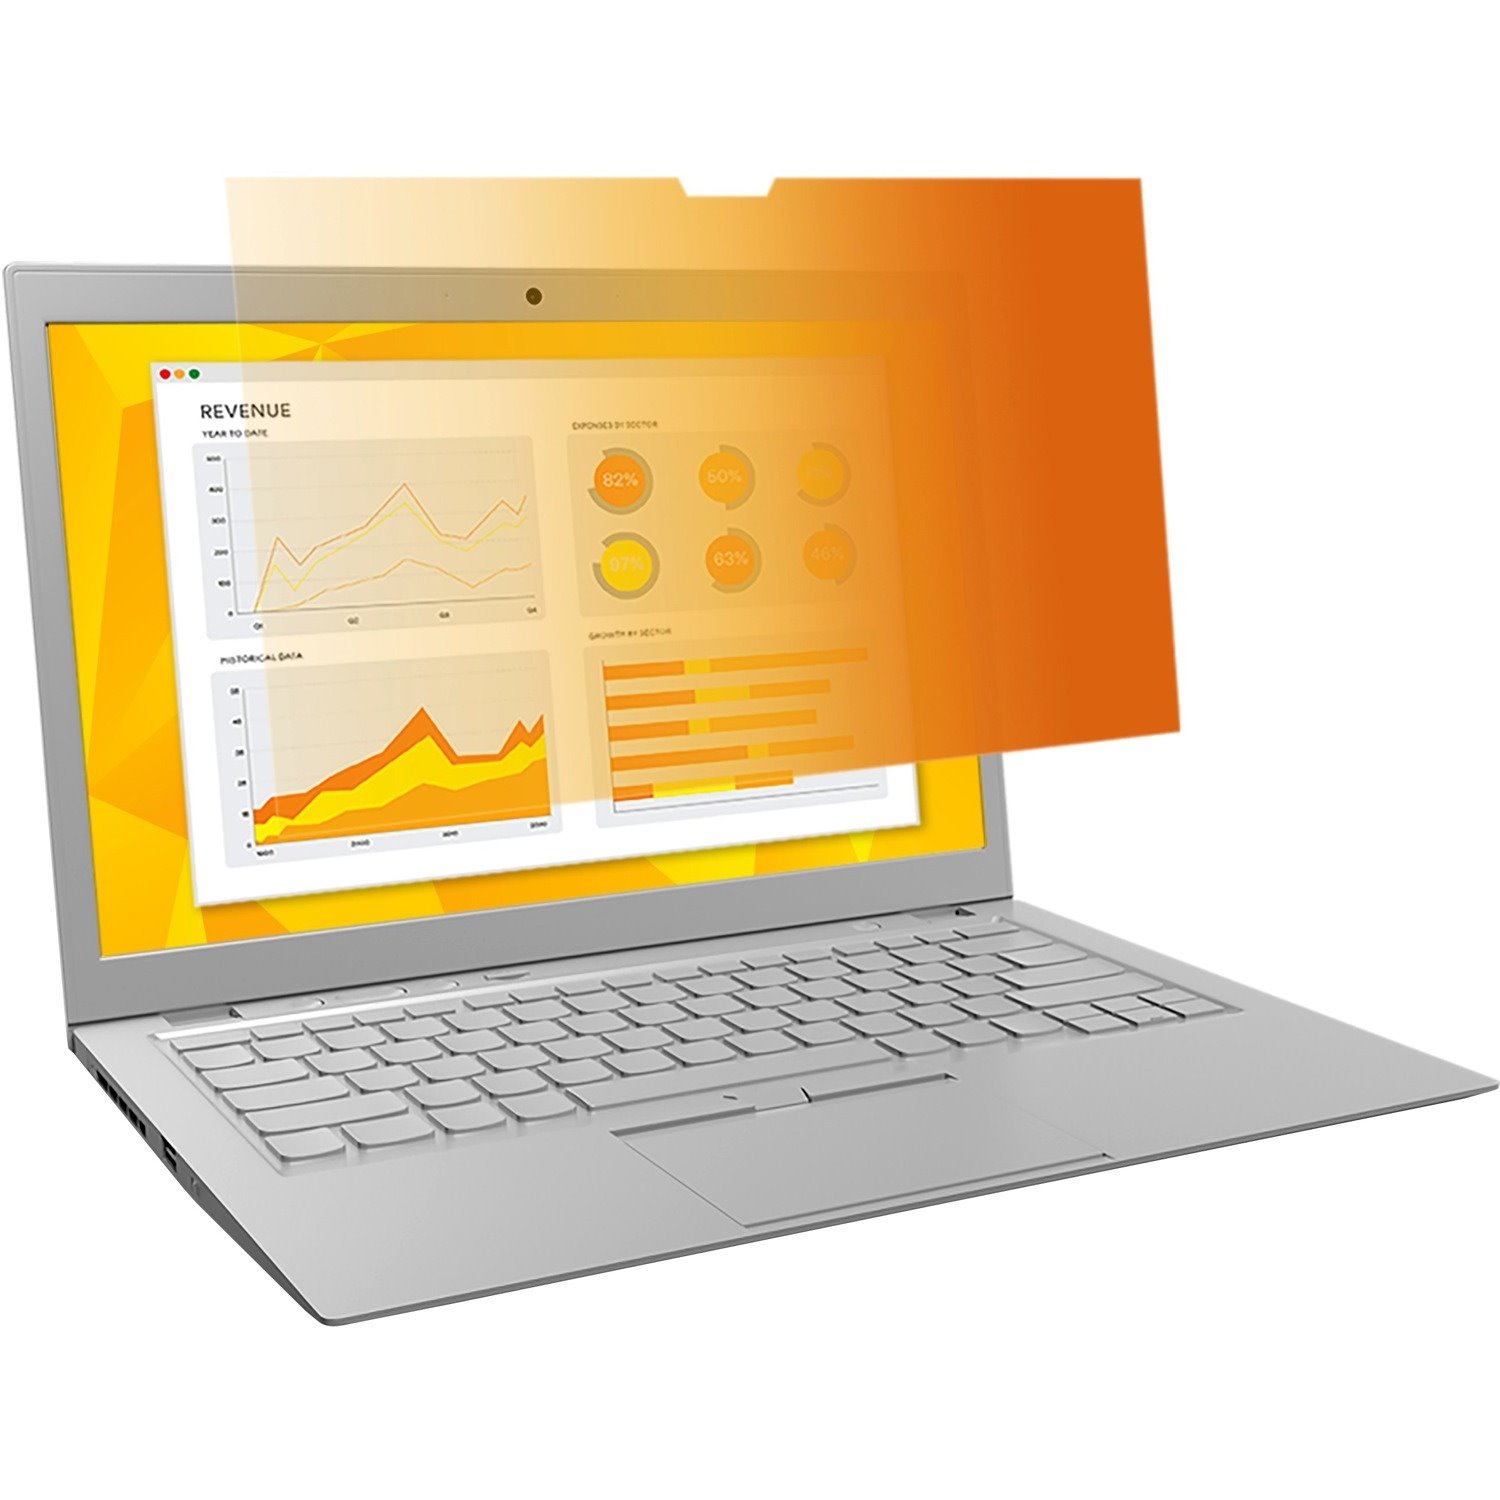 3M&trade; Gold Privacy Filter for 13.3" Widescreen Laptop (16:10)